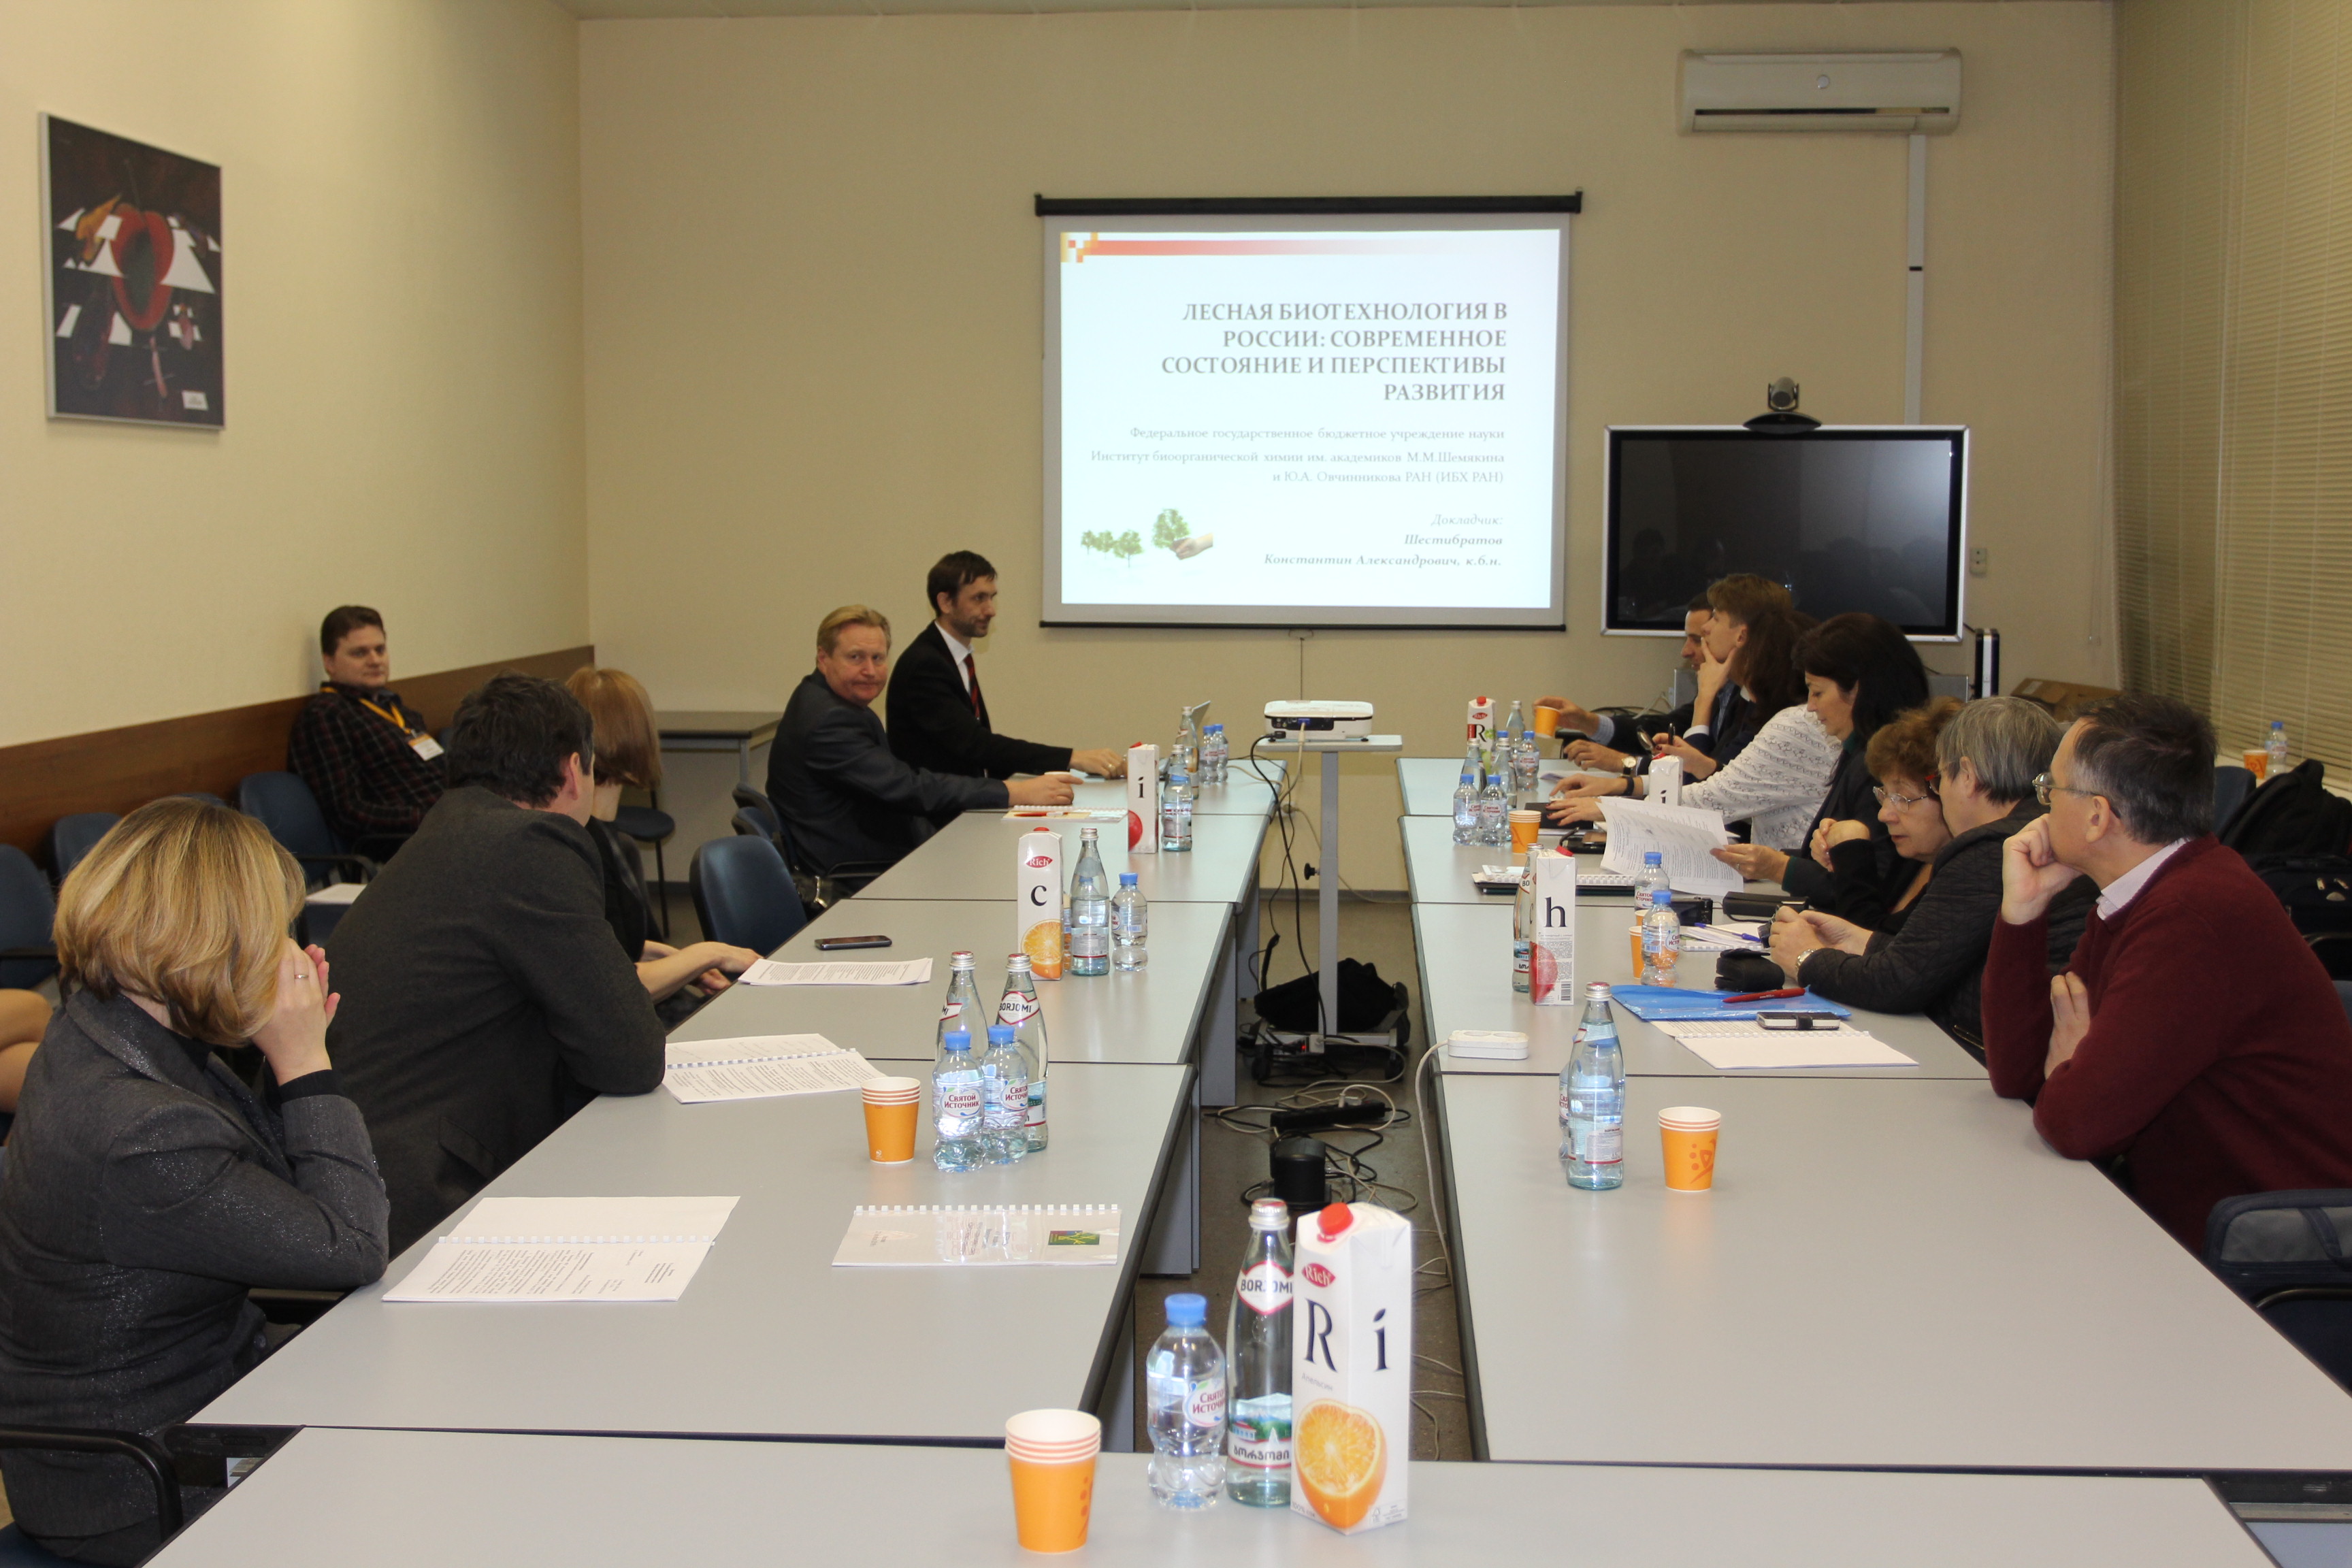 Forest biotechnology as an element of bioindustry of Russia